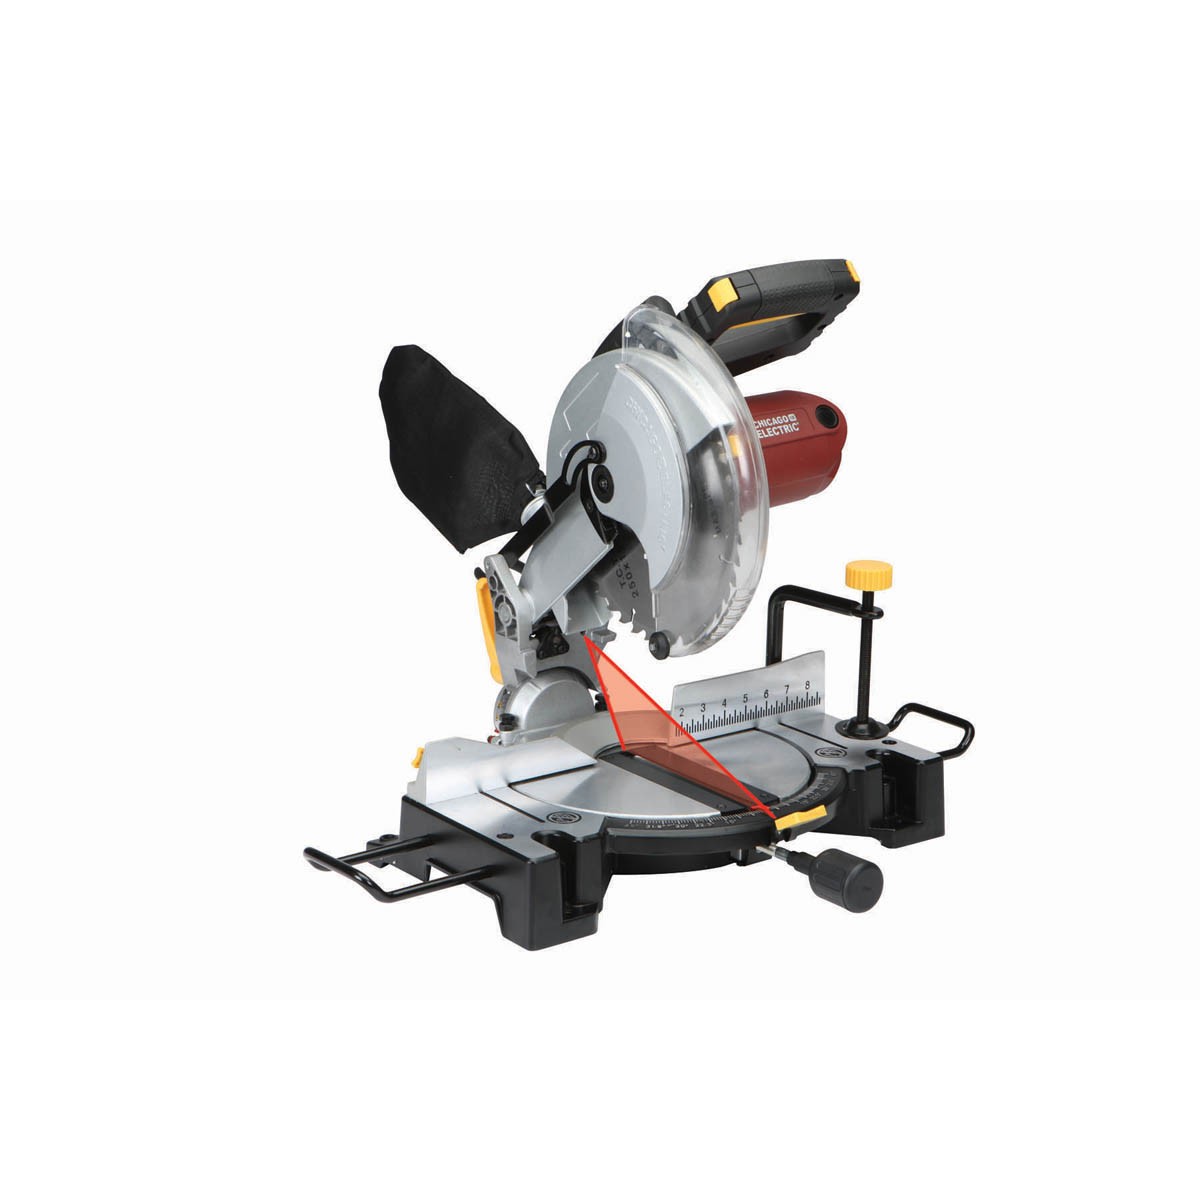 10 In. Compound Miter Saw With Laser Guide System